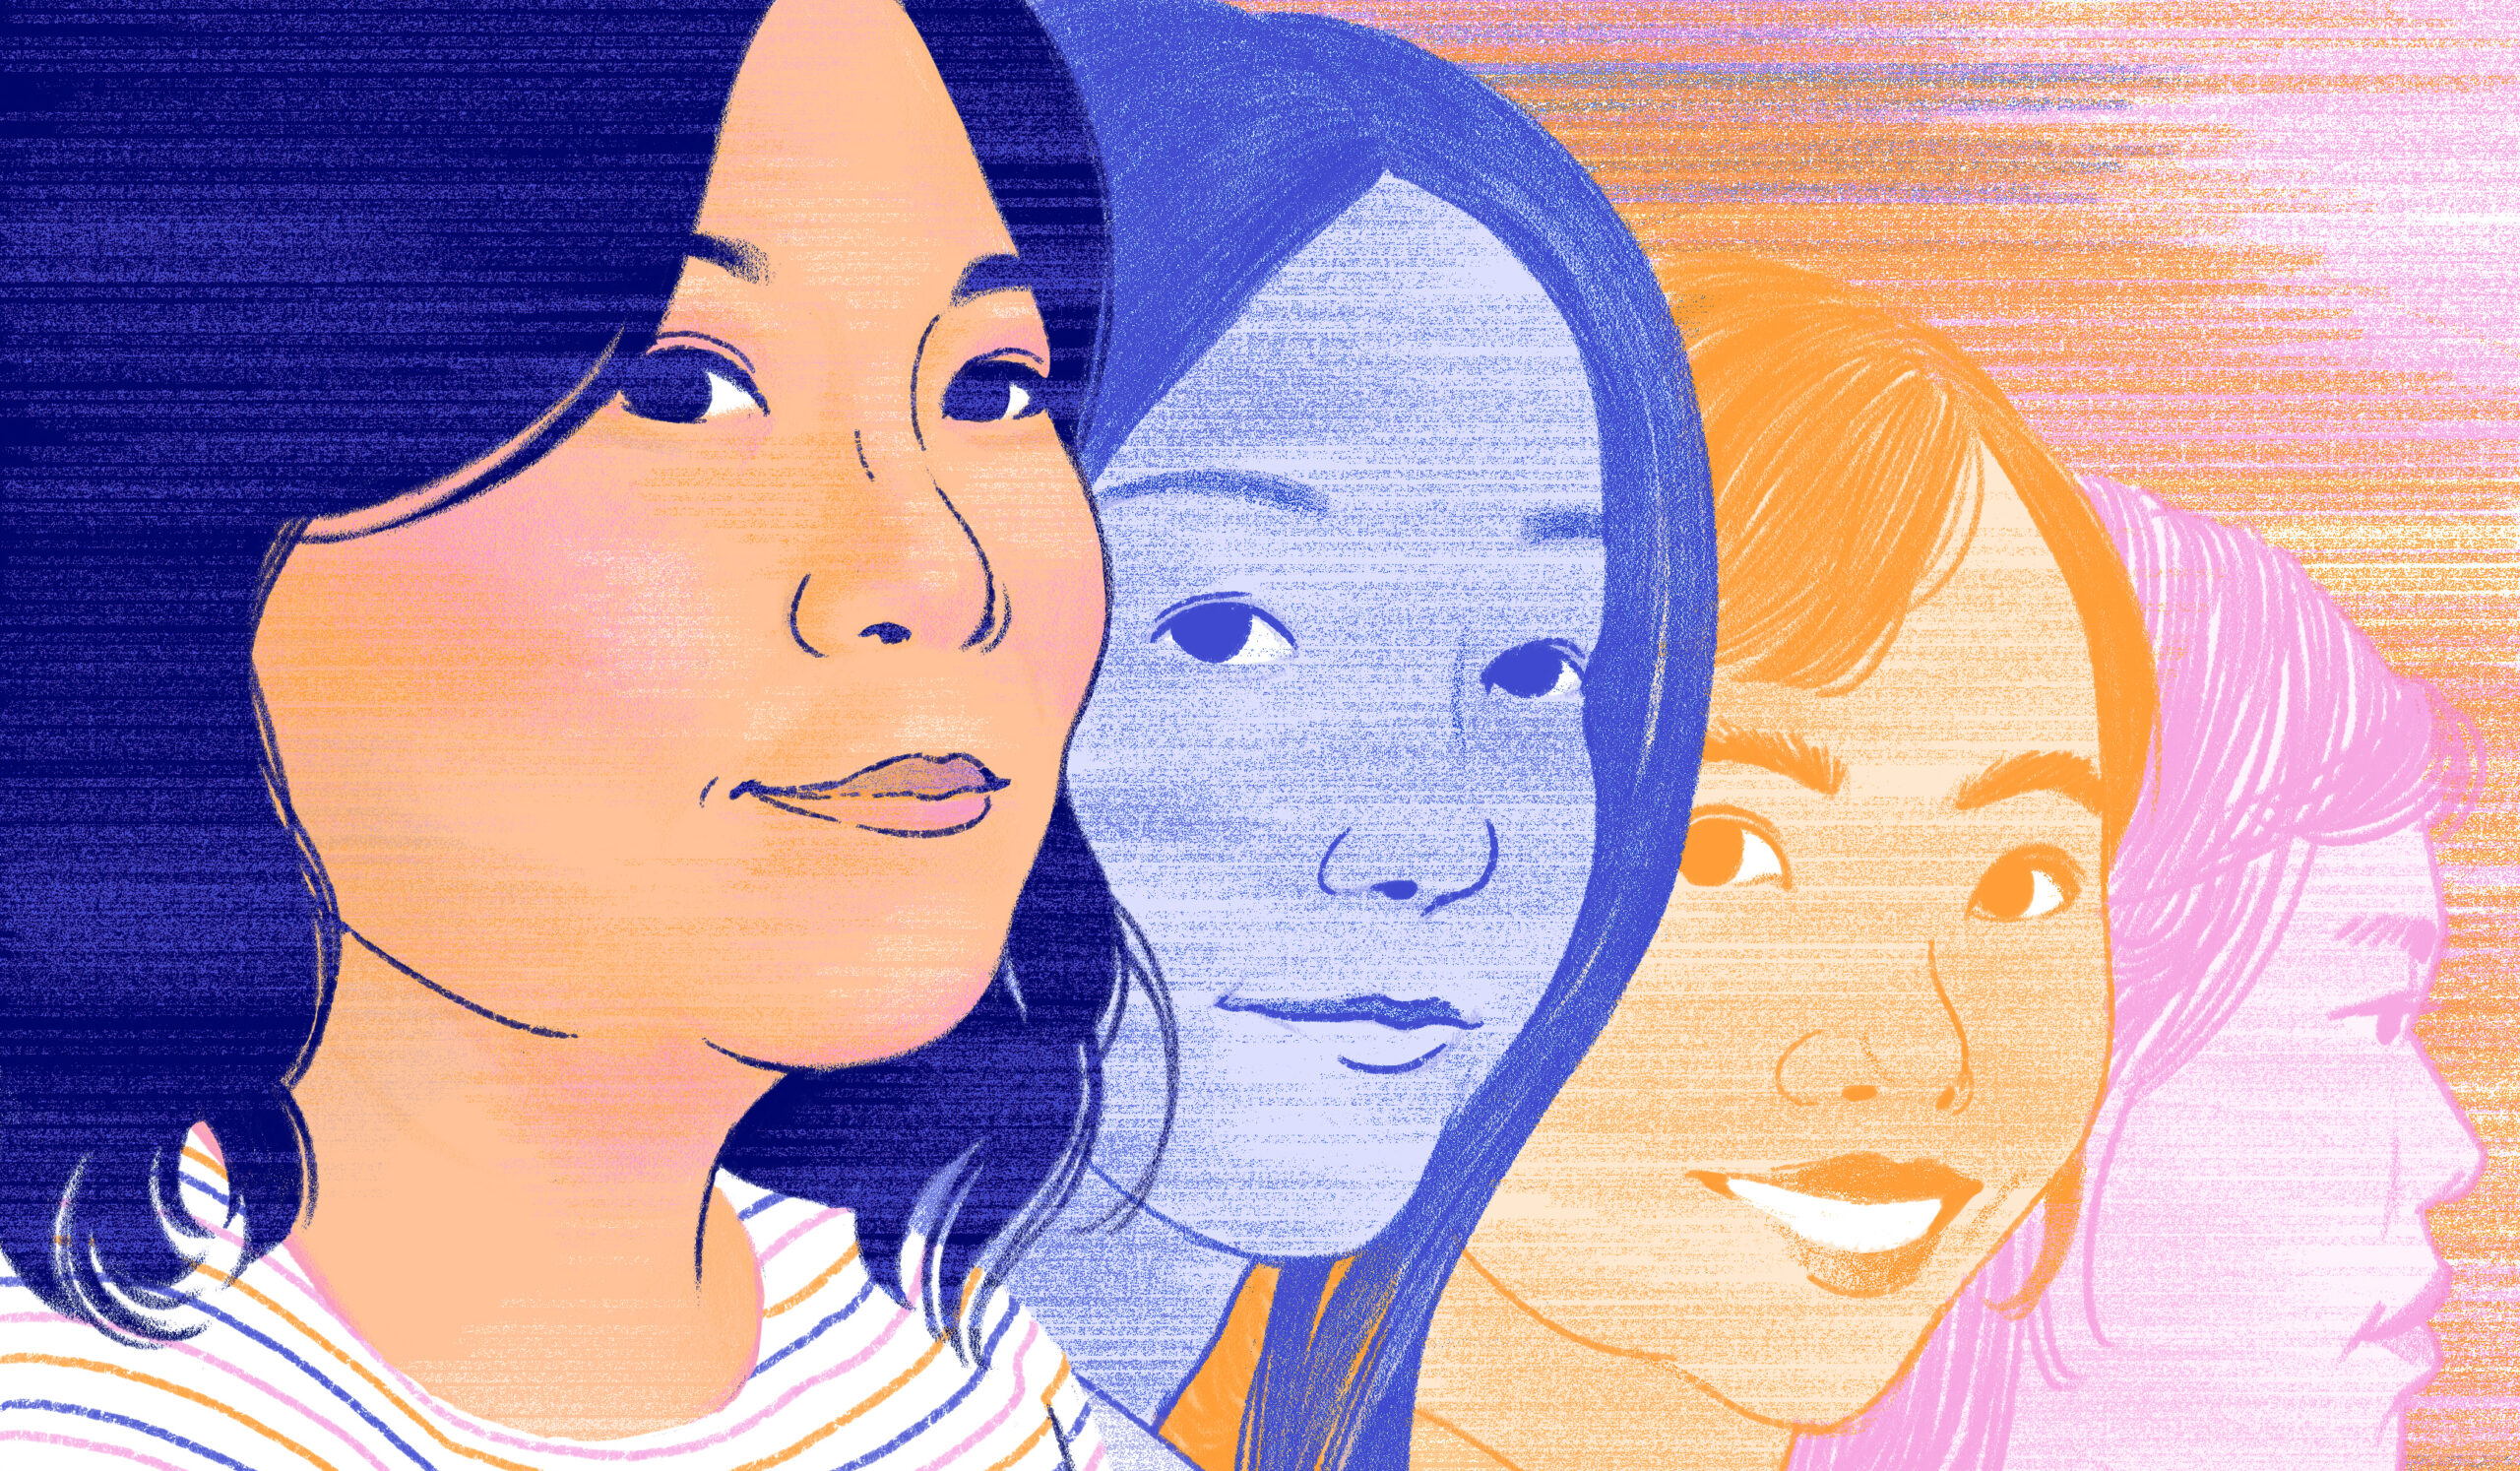 An illustration of Grace Meng and three other Asian women students in a line behind her drawn in blue, yellow, and pink.